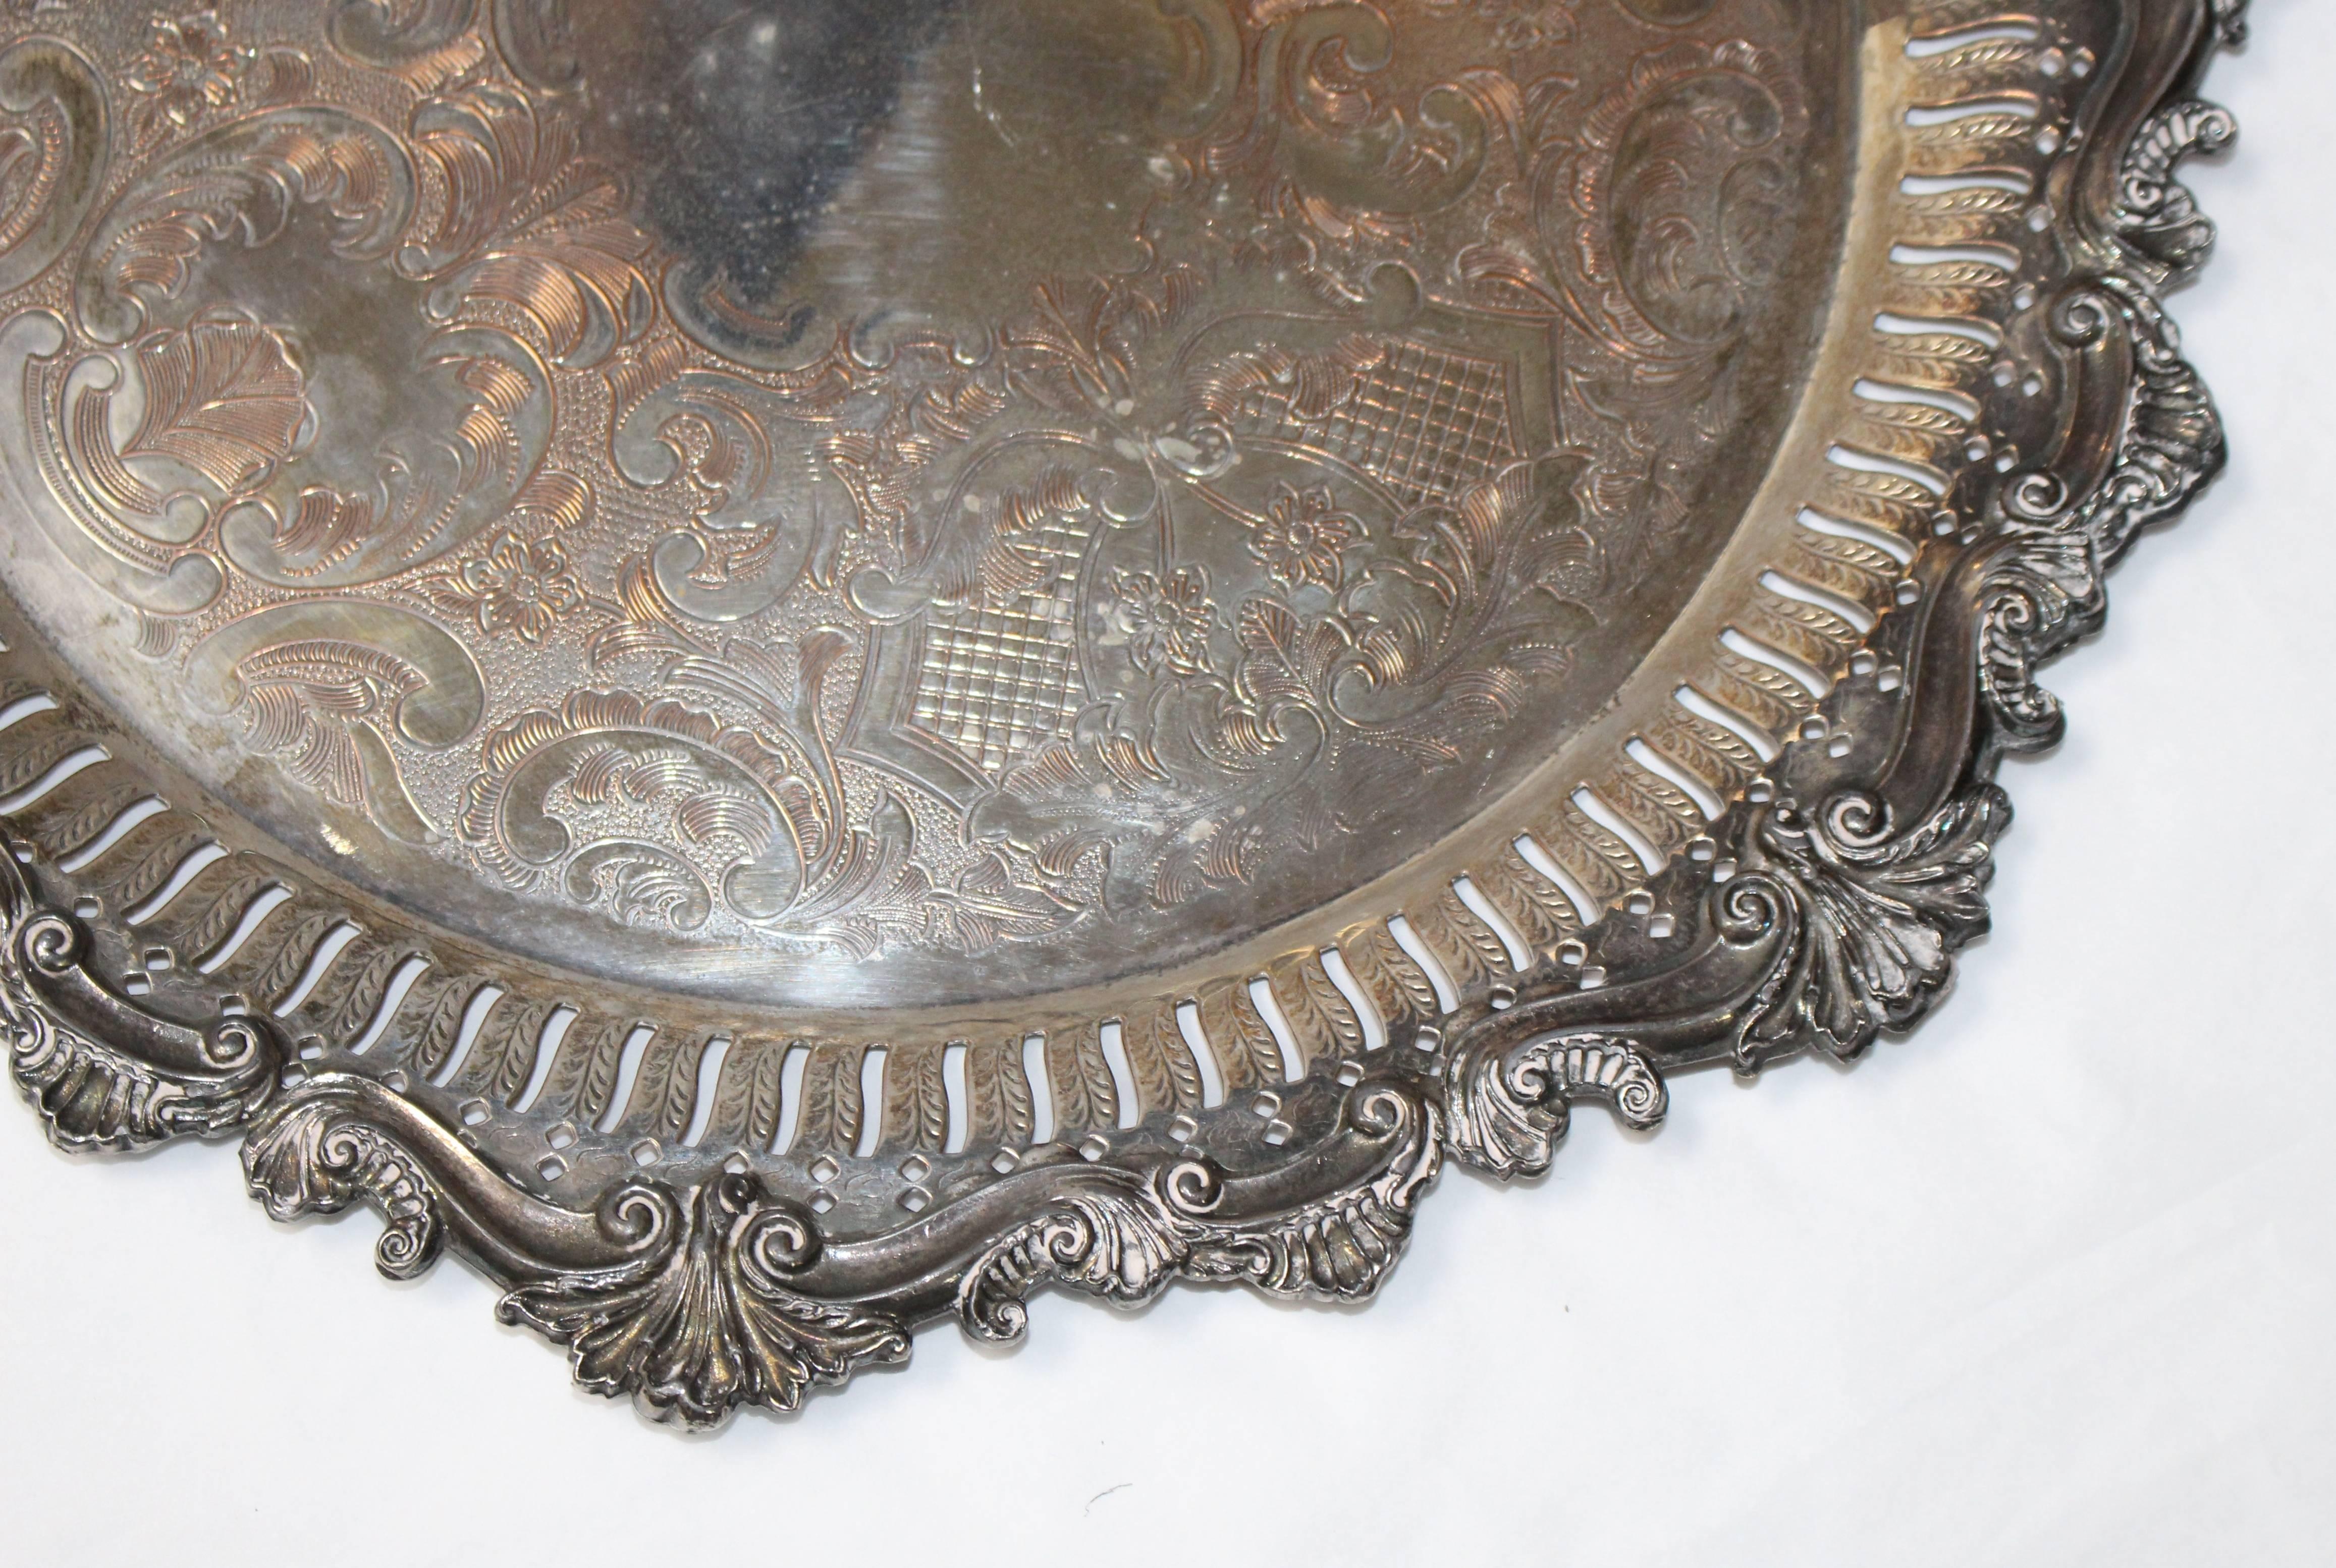 Heavy Ornate Engraved Antique Silver Plated on Copper Charger Tray 2